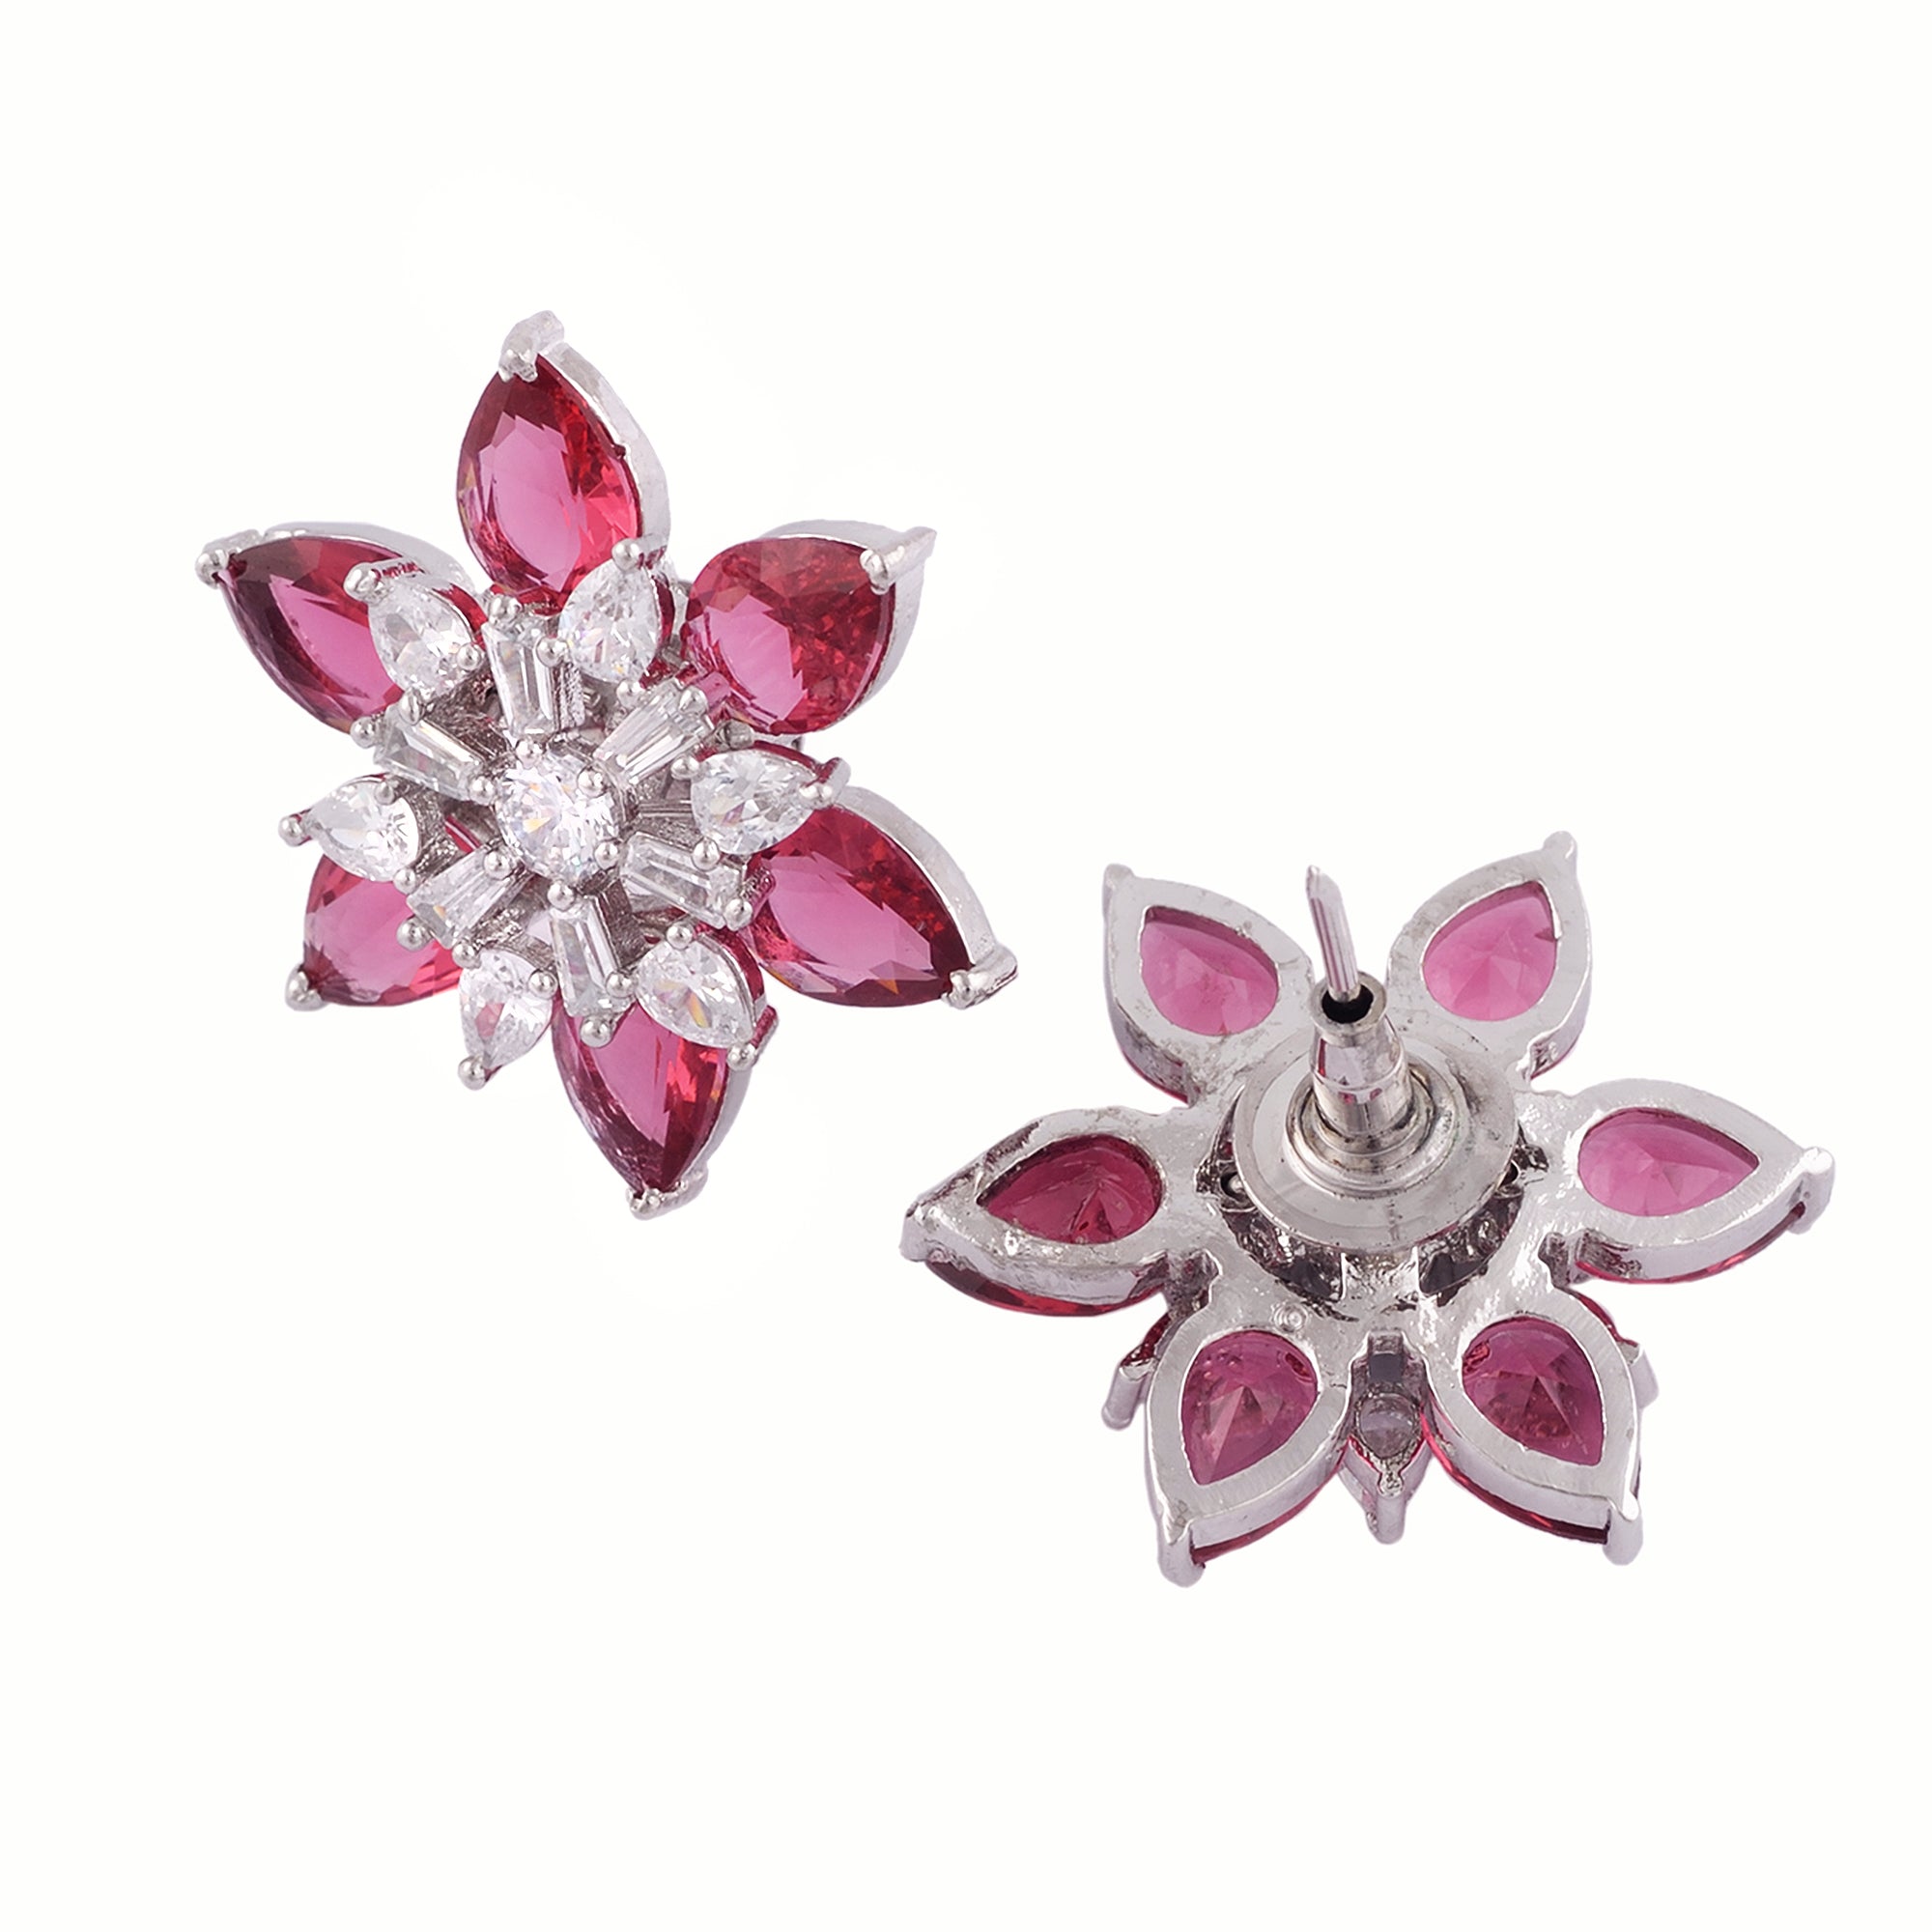 White Rhodium With Ruby American Diamond Studded Handcrafted Earrings for Women and Girls - Saraf RS Jewellery